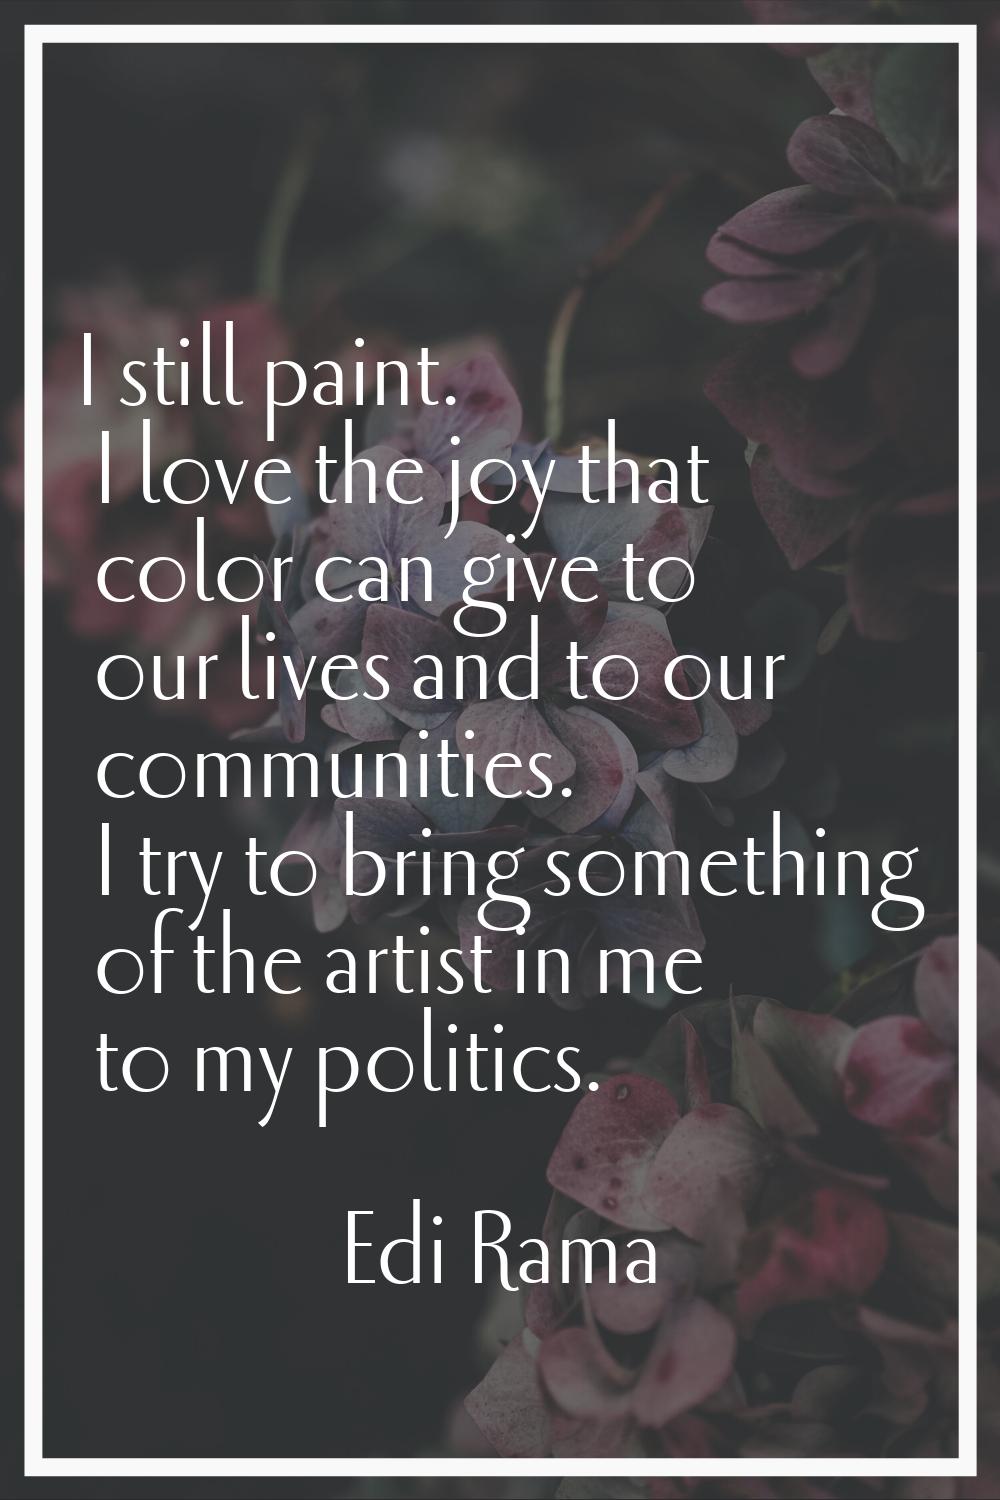 I still paint. I love the joy that color can give to our lives and to our communities. I try to bri